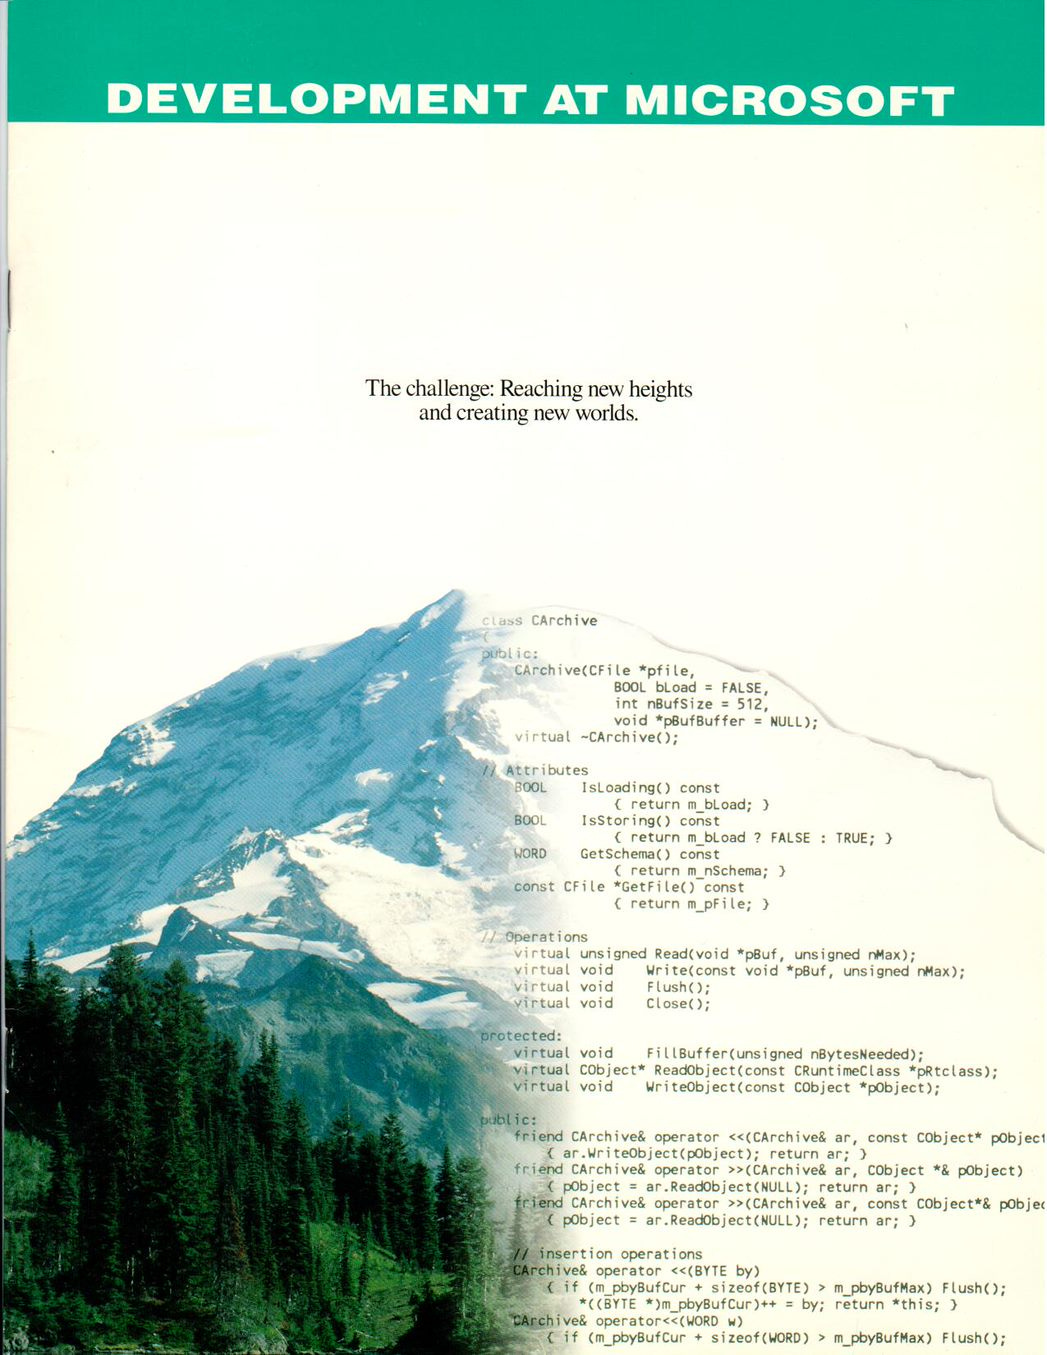 Microsoft recruiting brochure 1991/1992 showing Mr Ranier. The left side of the mountain is a photo of the mountain. The right side is code from AFX showing some of the C++ coding conventions we created.